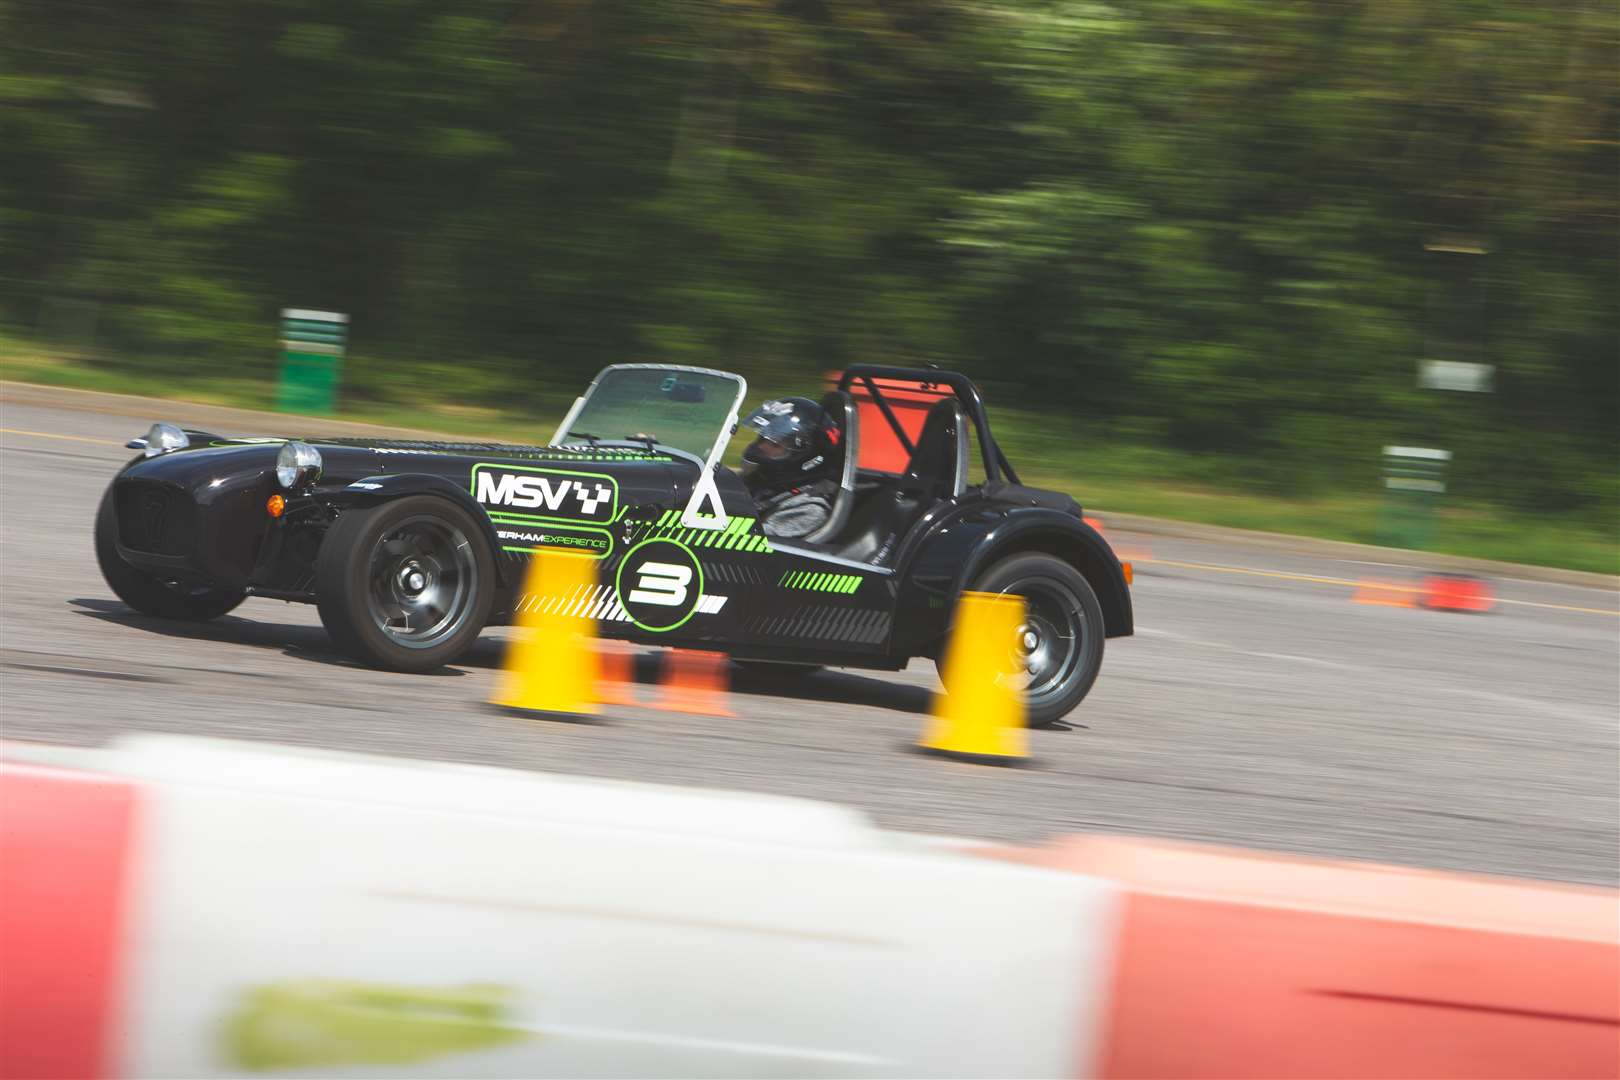 Taking the Caterham between the cones is difficult